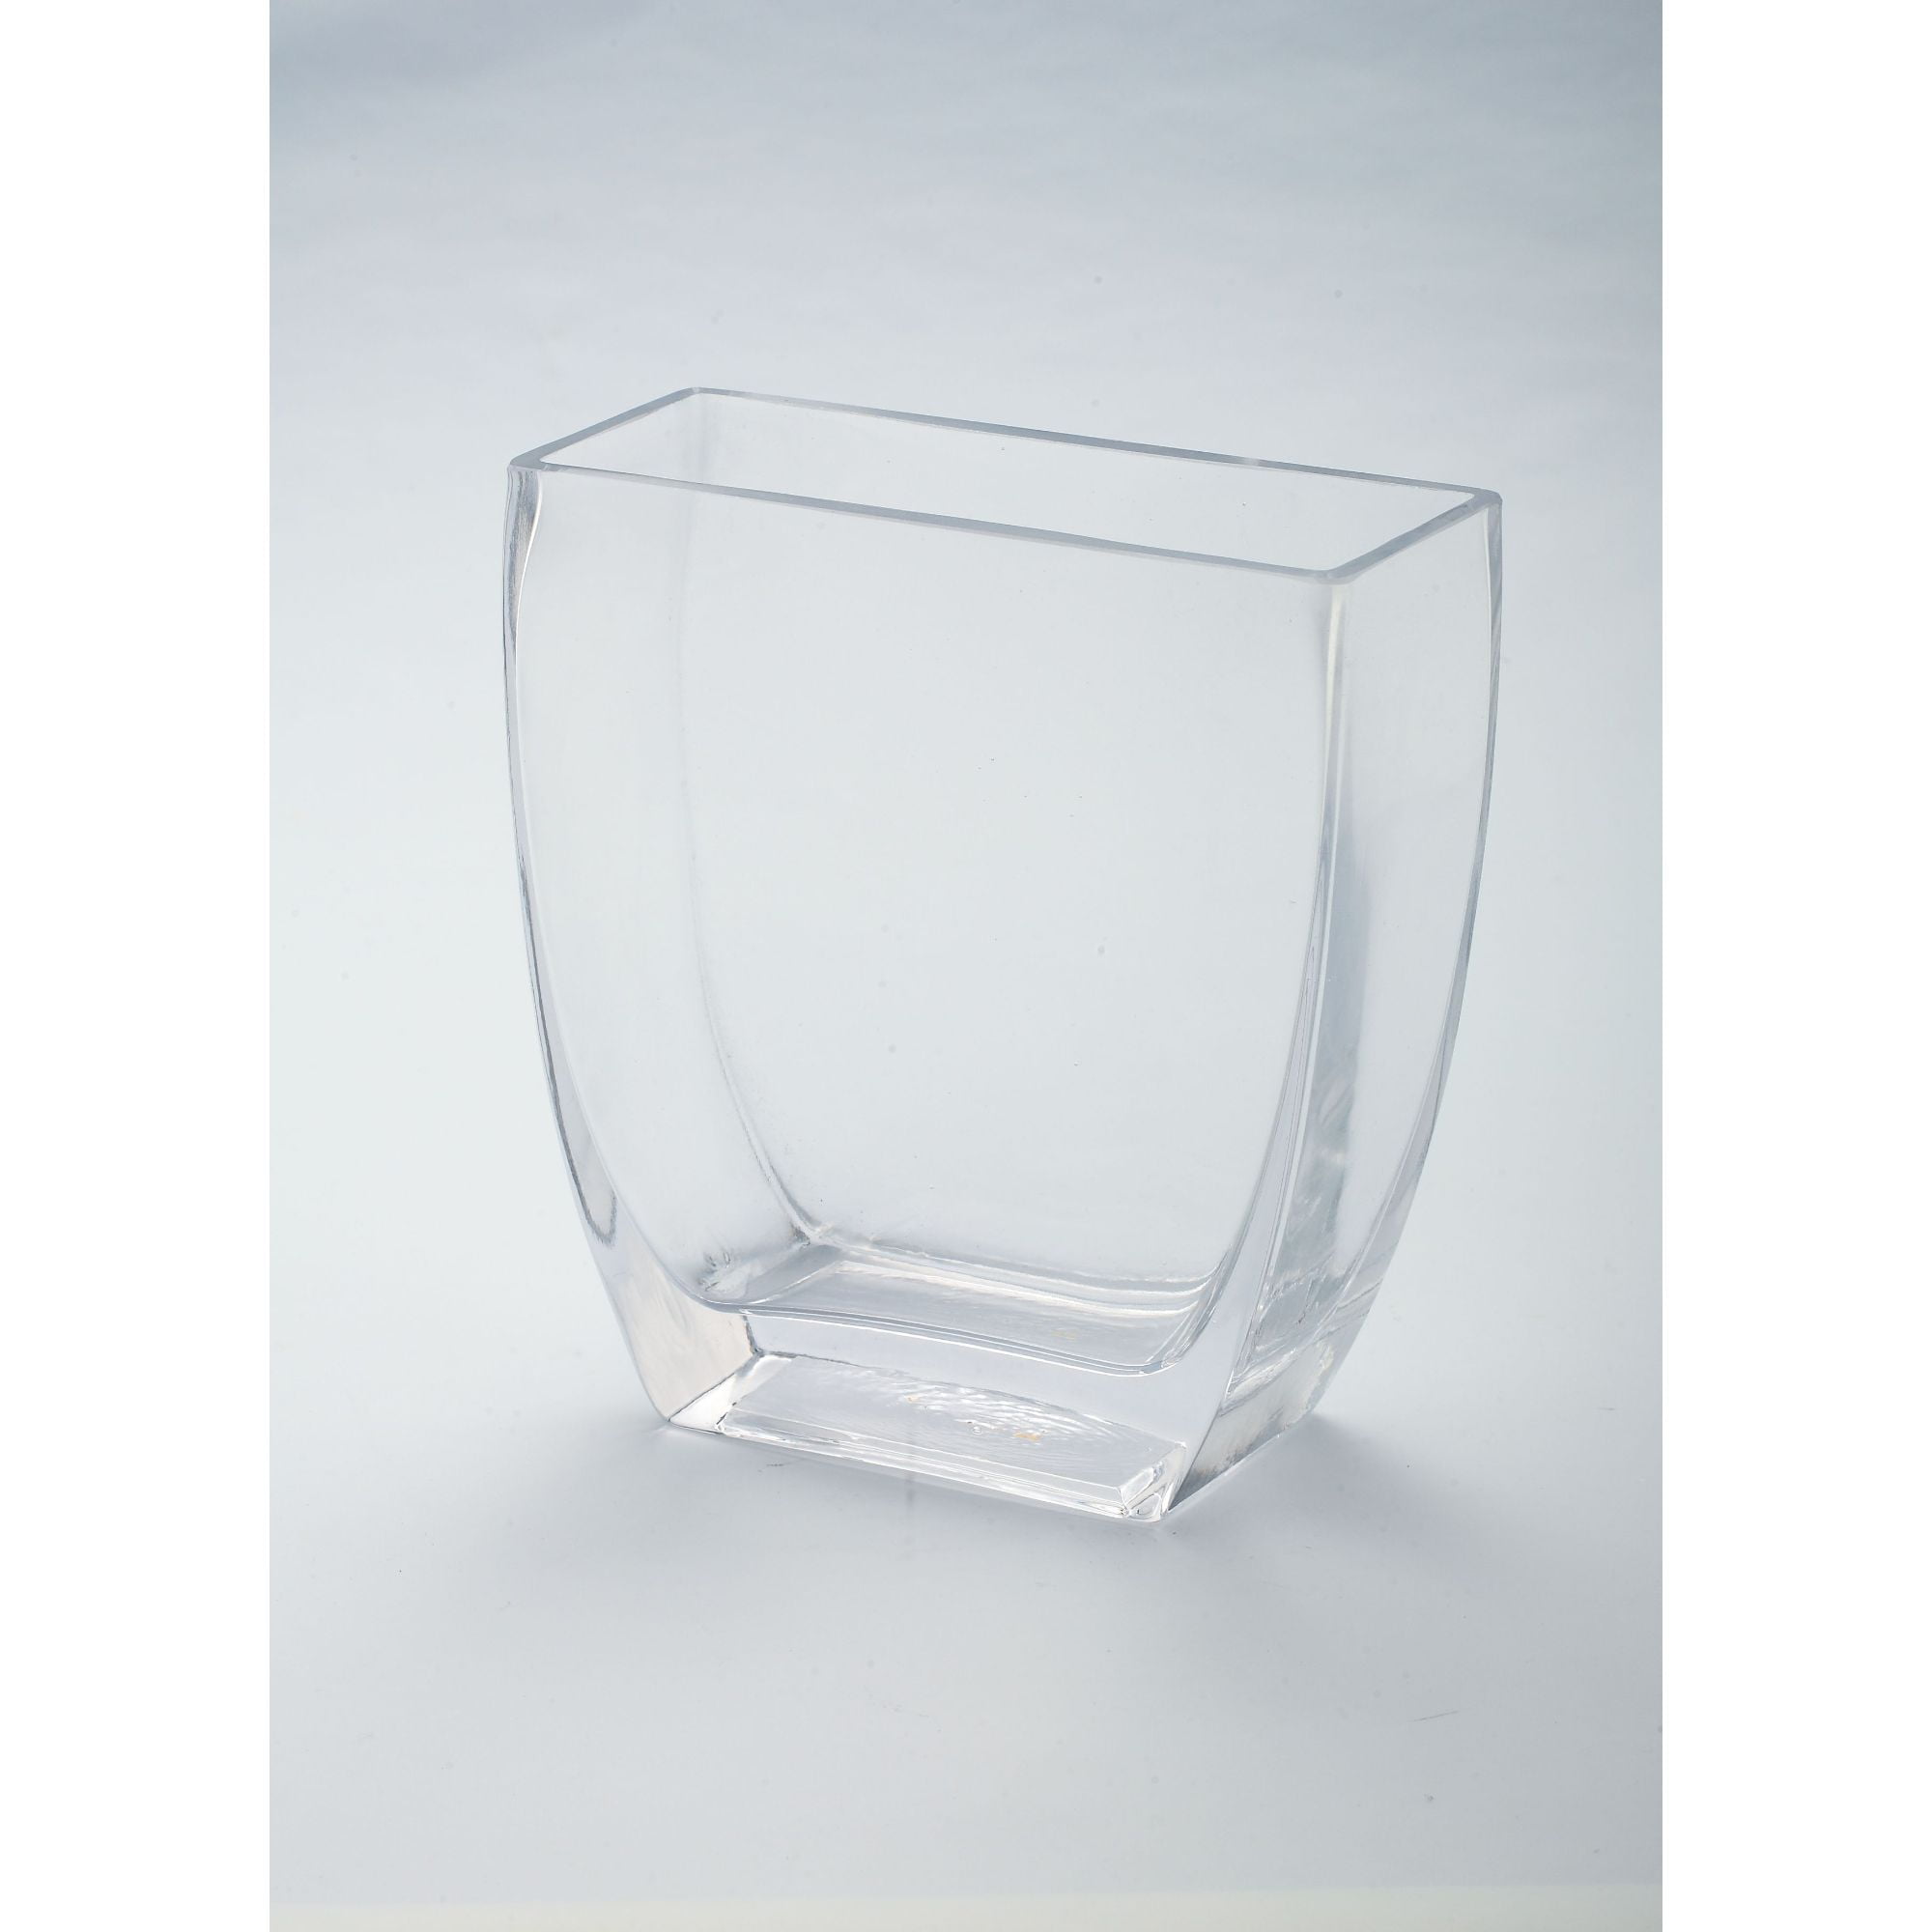 8 Inch Clear Large Square Glass Vase Cube 8" x 8" x 8" Oversize Centerpiece 